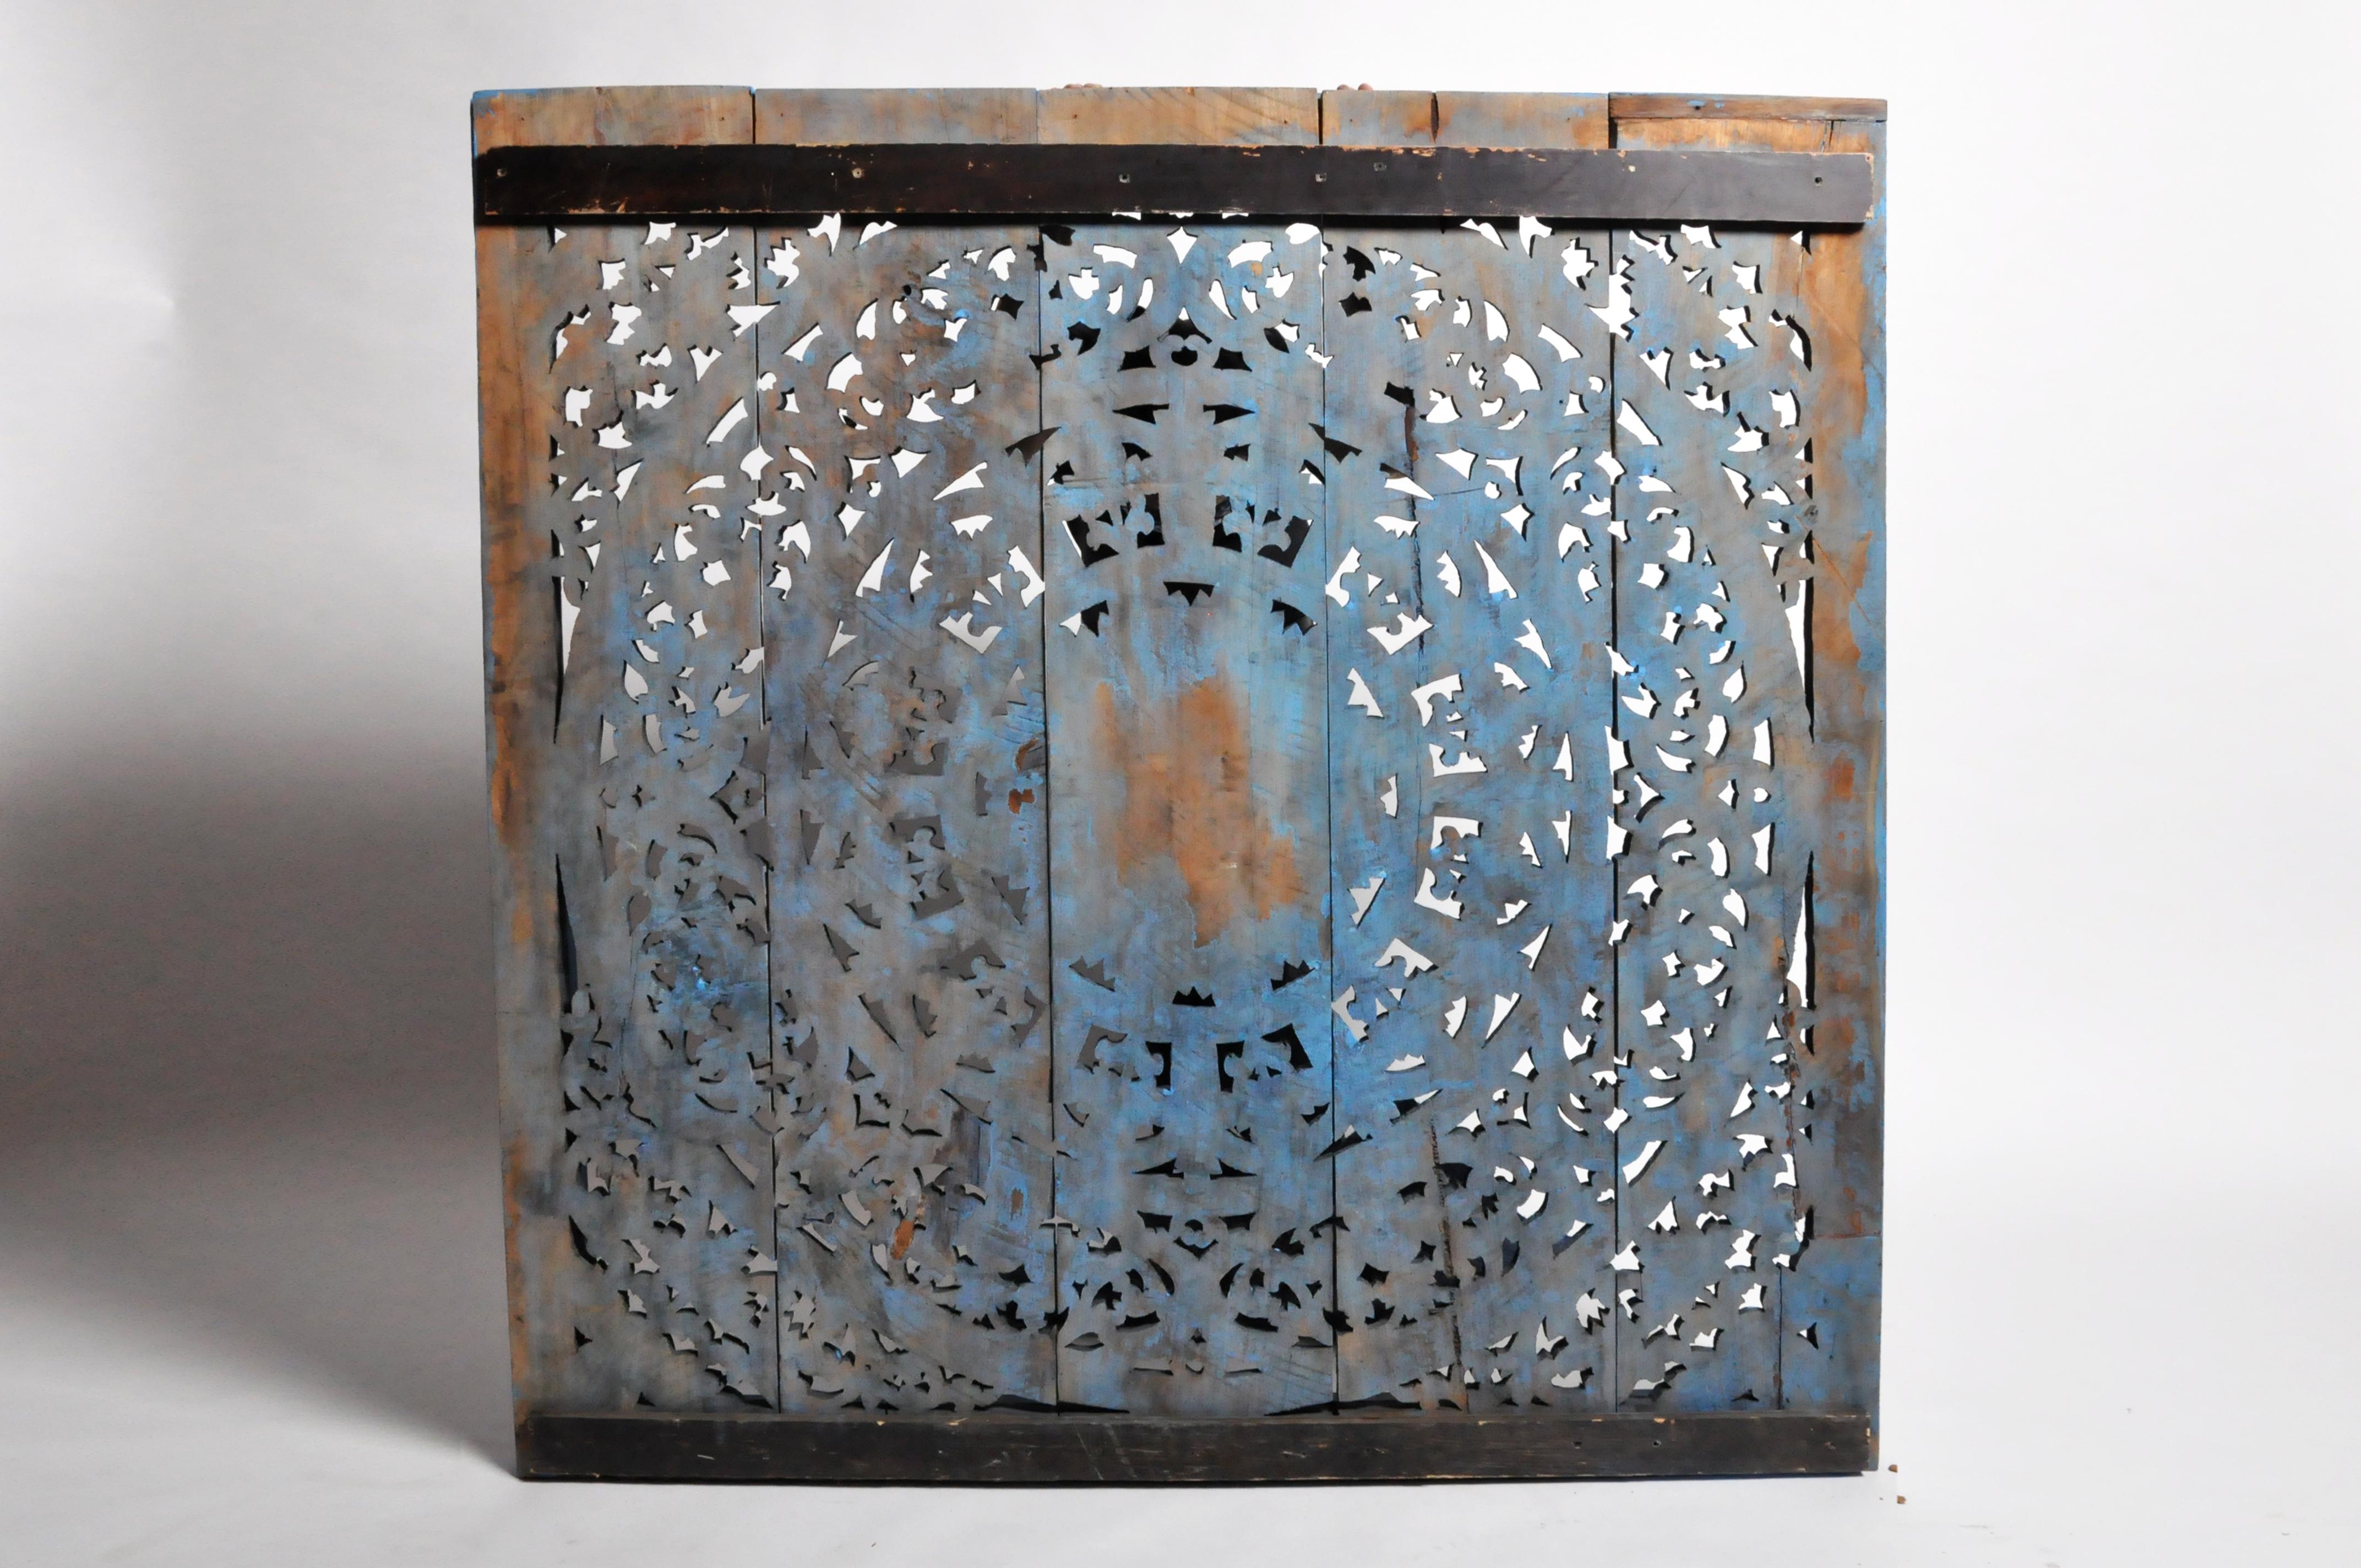 The hand carved relief features a central lotus flower medallion, encompassed by scrolling foliage and budding vine decoration. Intricately carved from teak wood, the piece has been painted with a “Krishna” blue wash traditional to much of India.